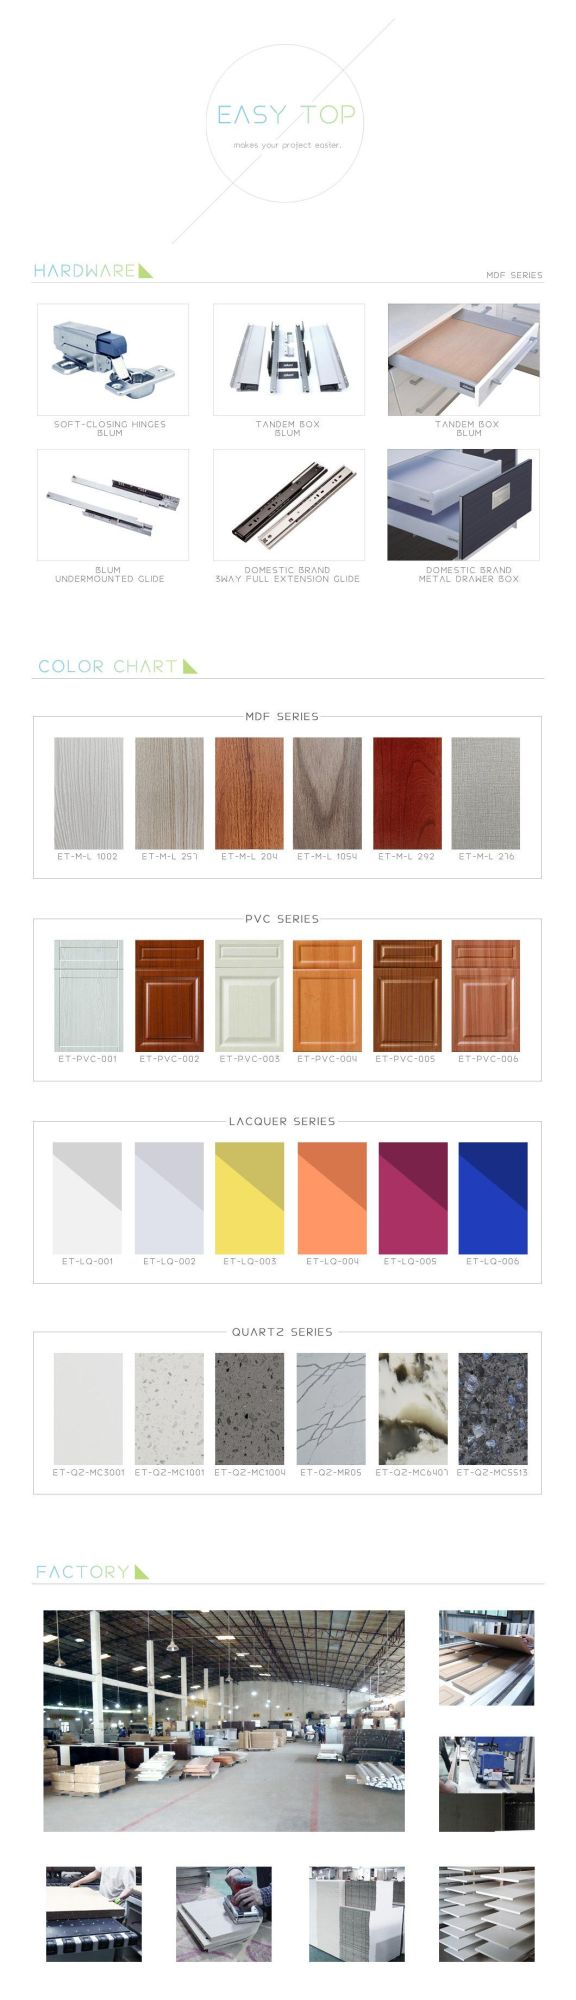 American Style PVC Handleless Solid Wood Designs of Kitchen Hanging Cabinets furniture